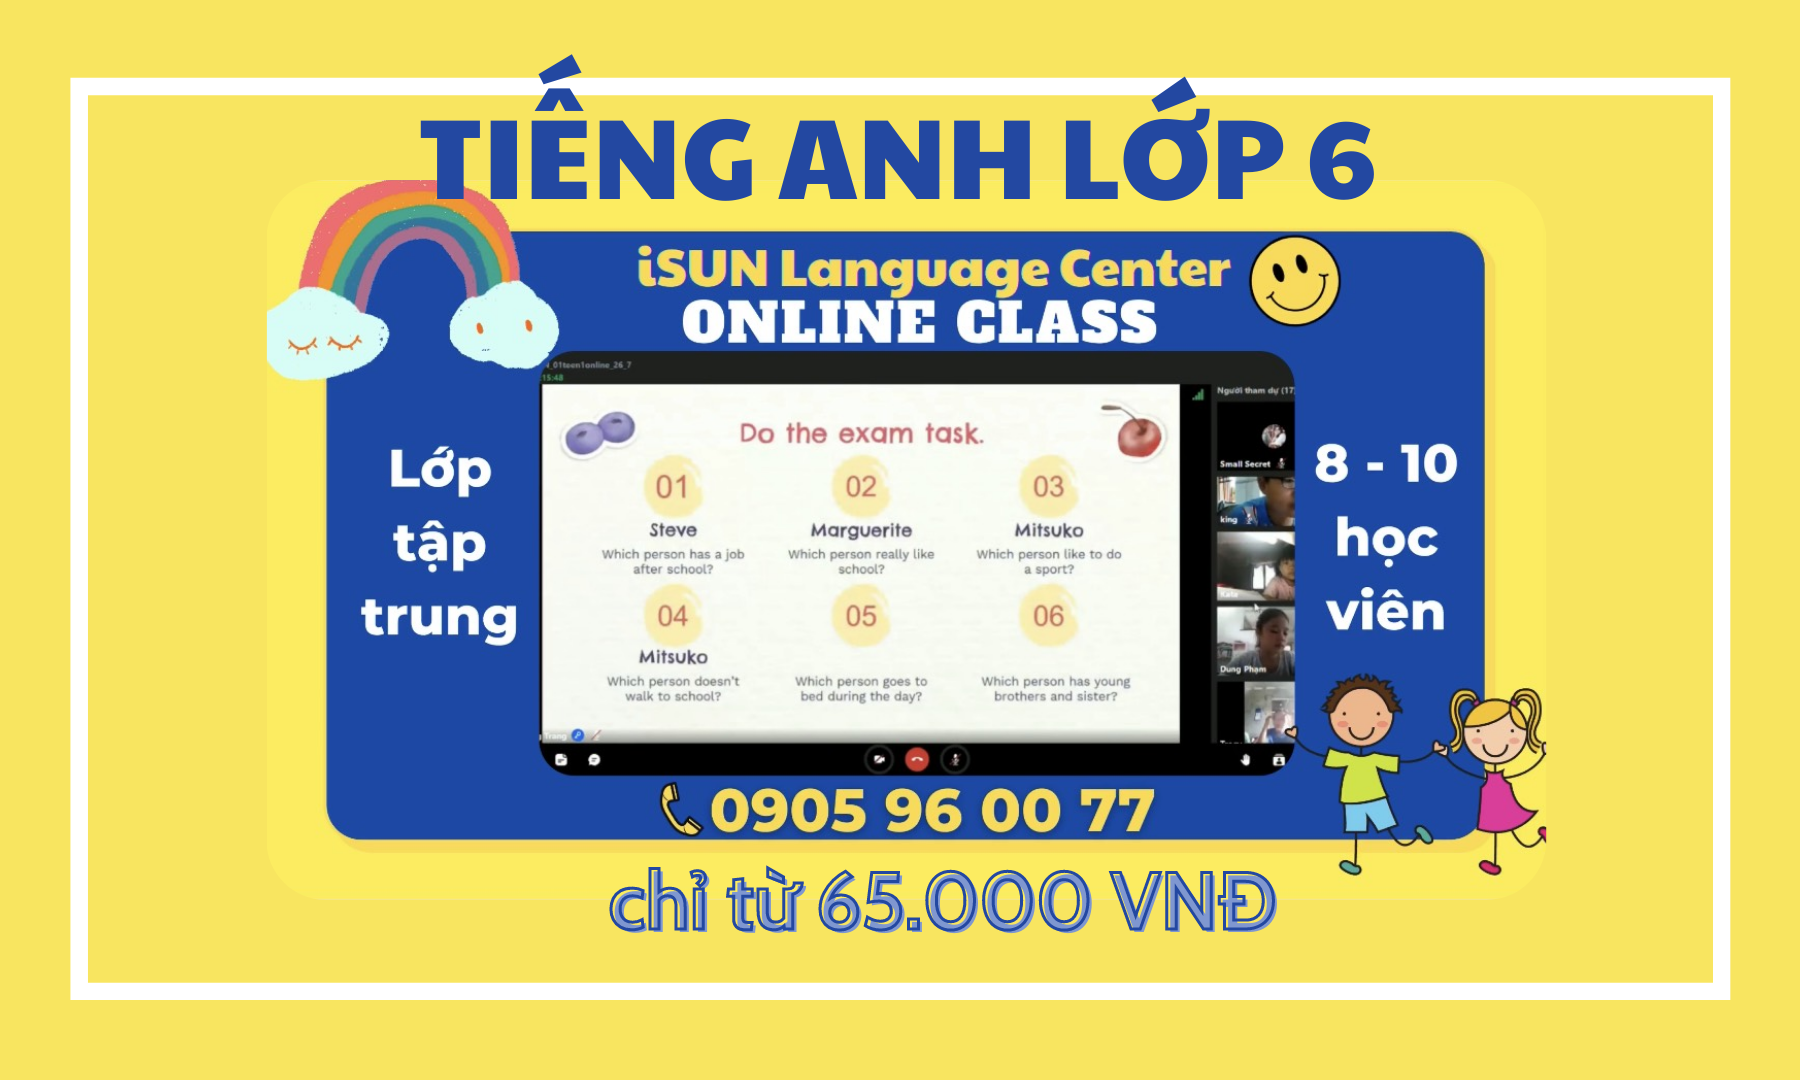 TIẾNG ANH LỚP 6 online